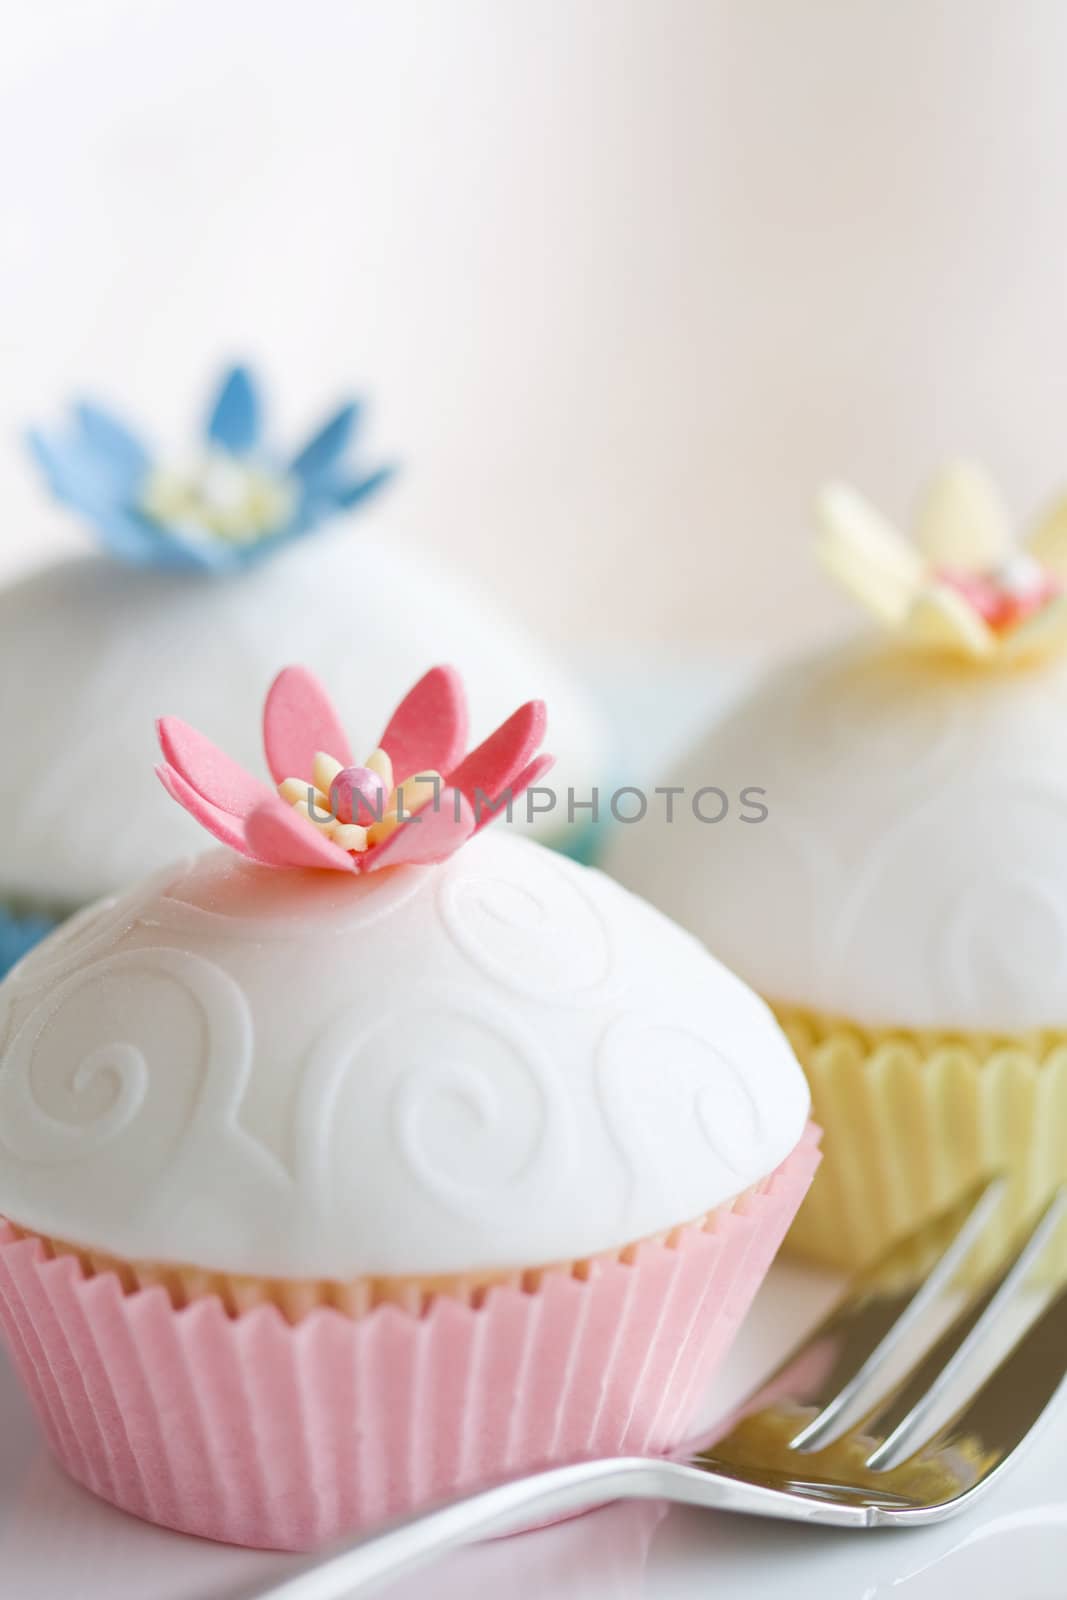 Cupcakes decorated with embossed fondant and sugar flowers